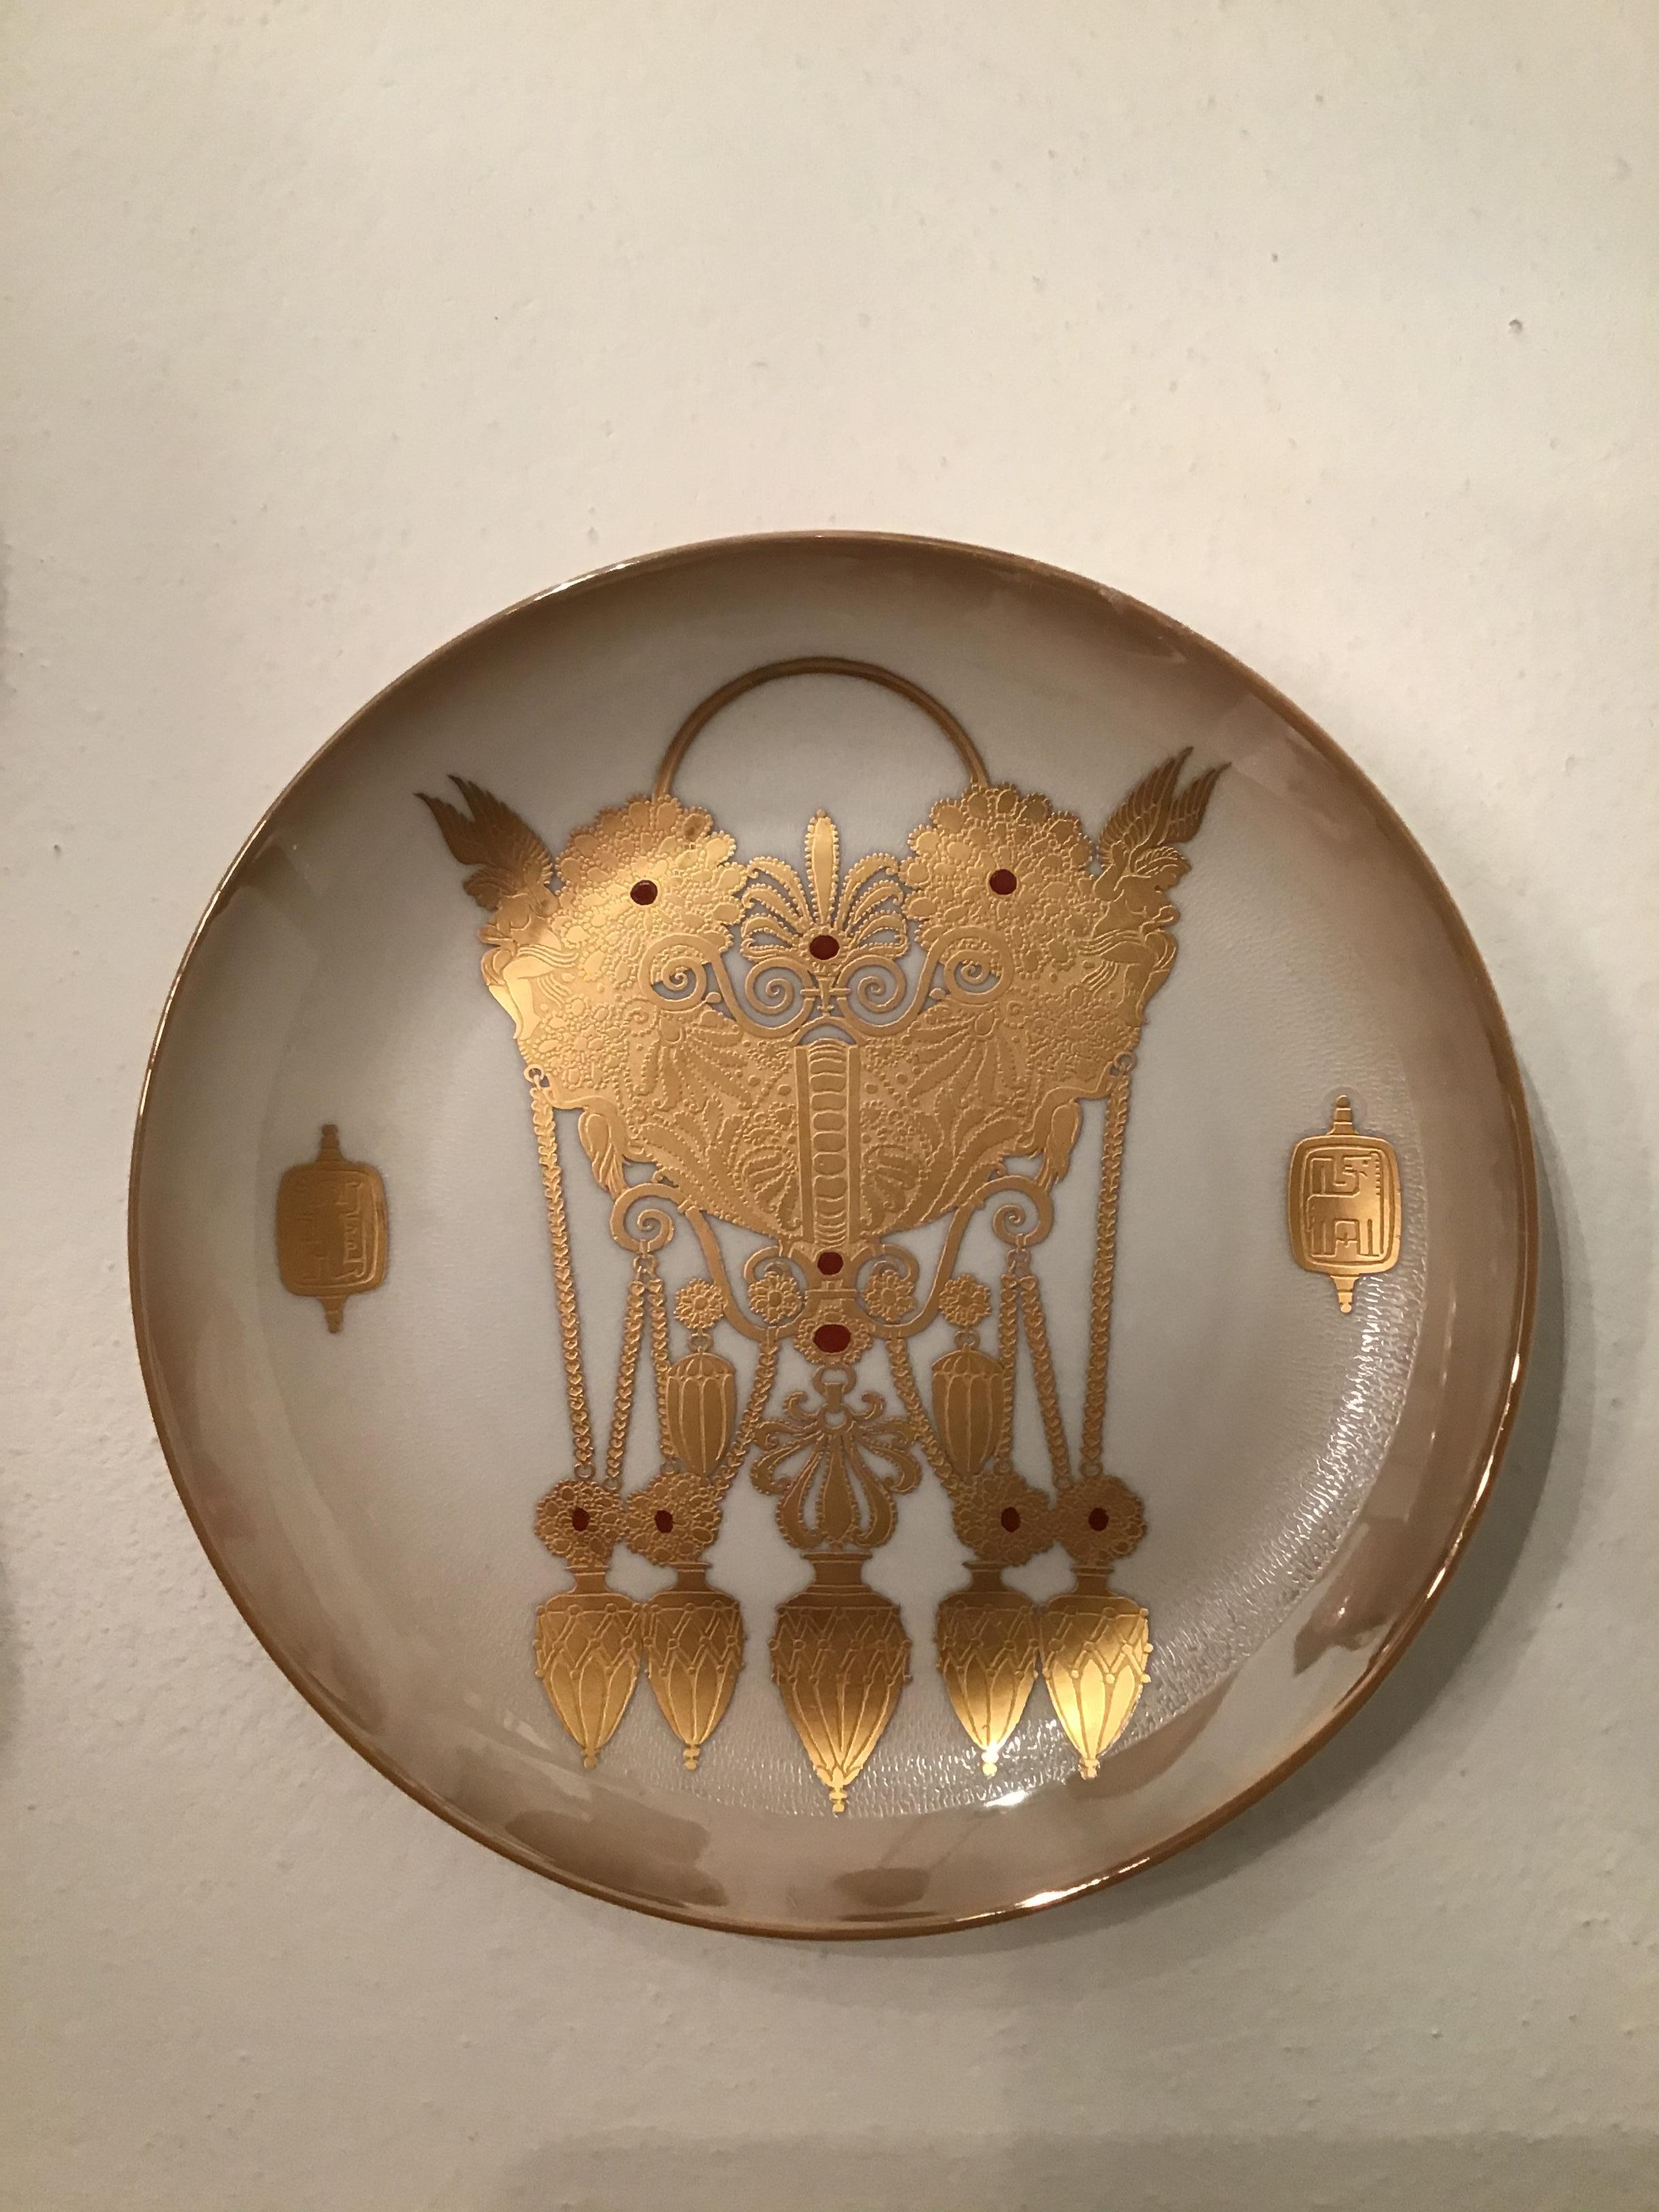 Morbelli Porcelain Wall Plate “Gioielli Italici”, 1987 Italy  In Excellent Condition For Sale In Milano, IT